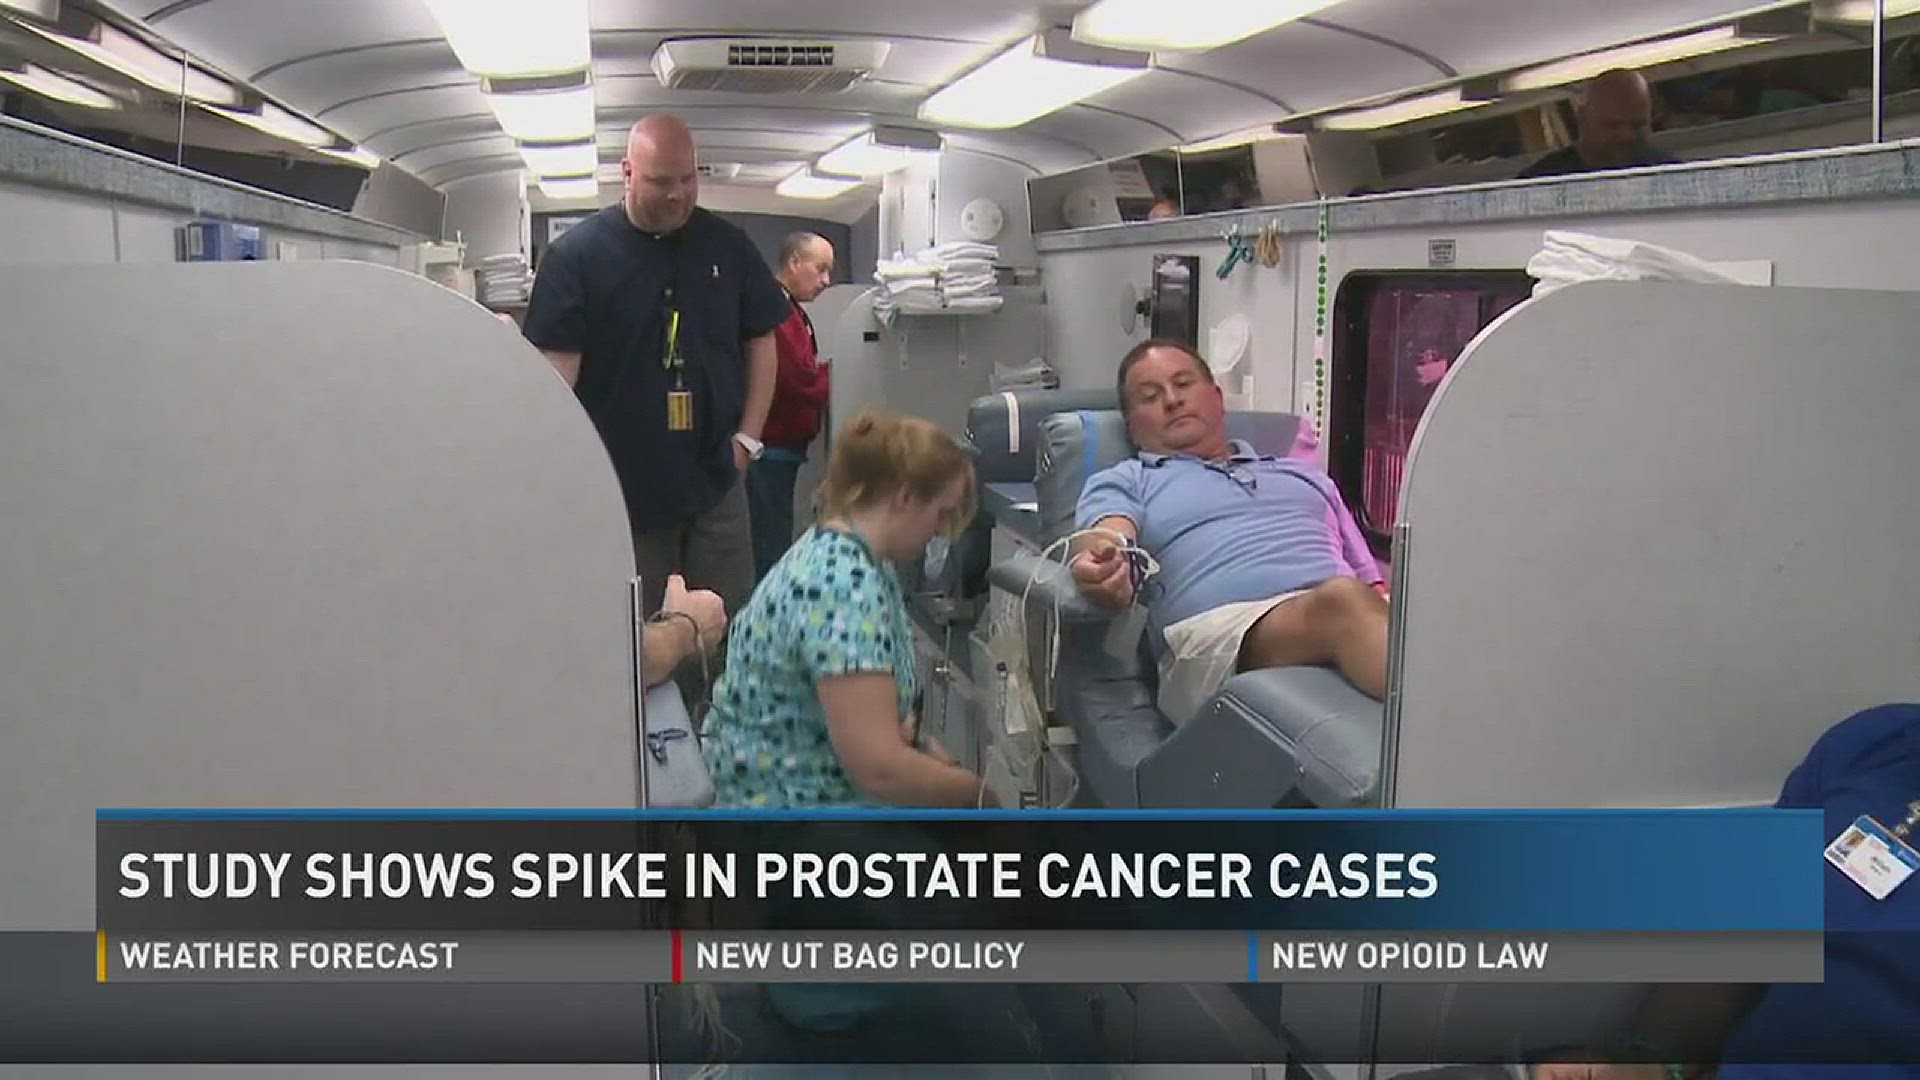 A new health study shows a 72 percent increase in the number of prostate cancer cases in the last decade.